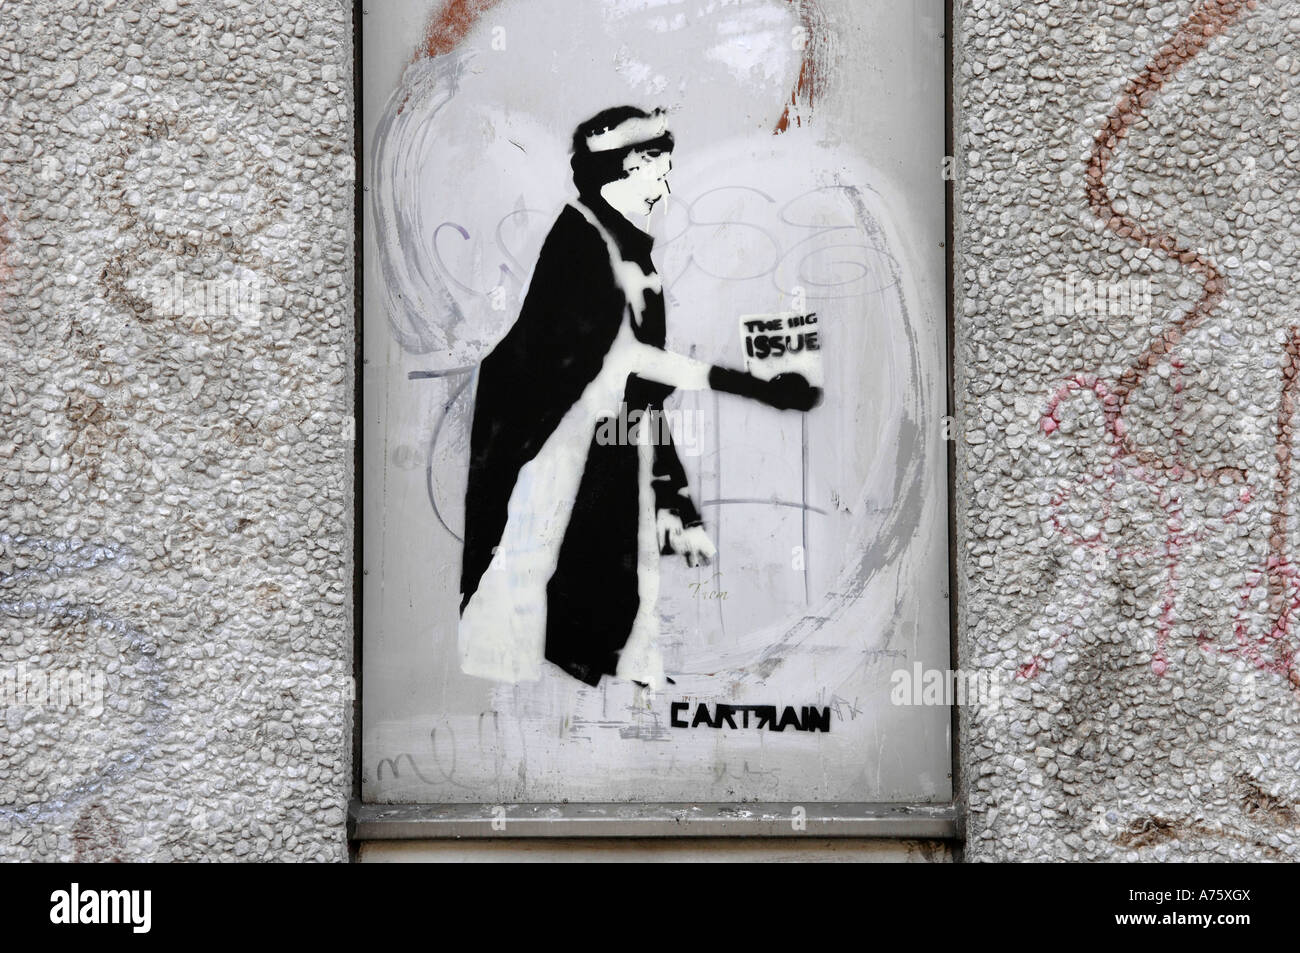 Cartrain Queen Selling Big Issue Graffiti Art Banksy Style Stock Photo